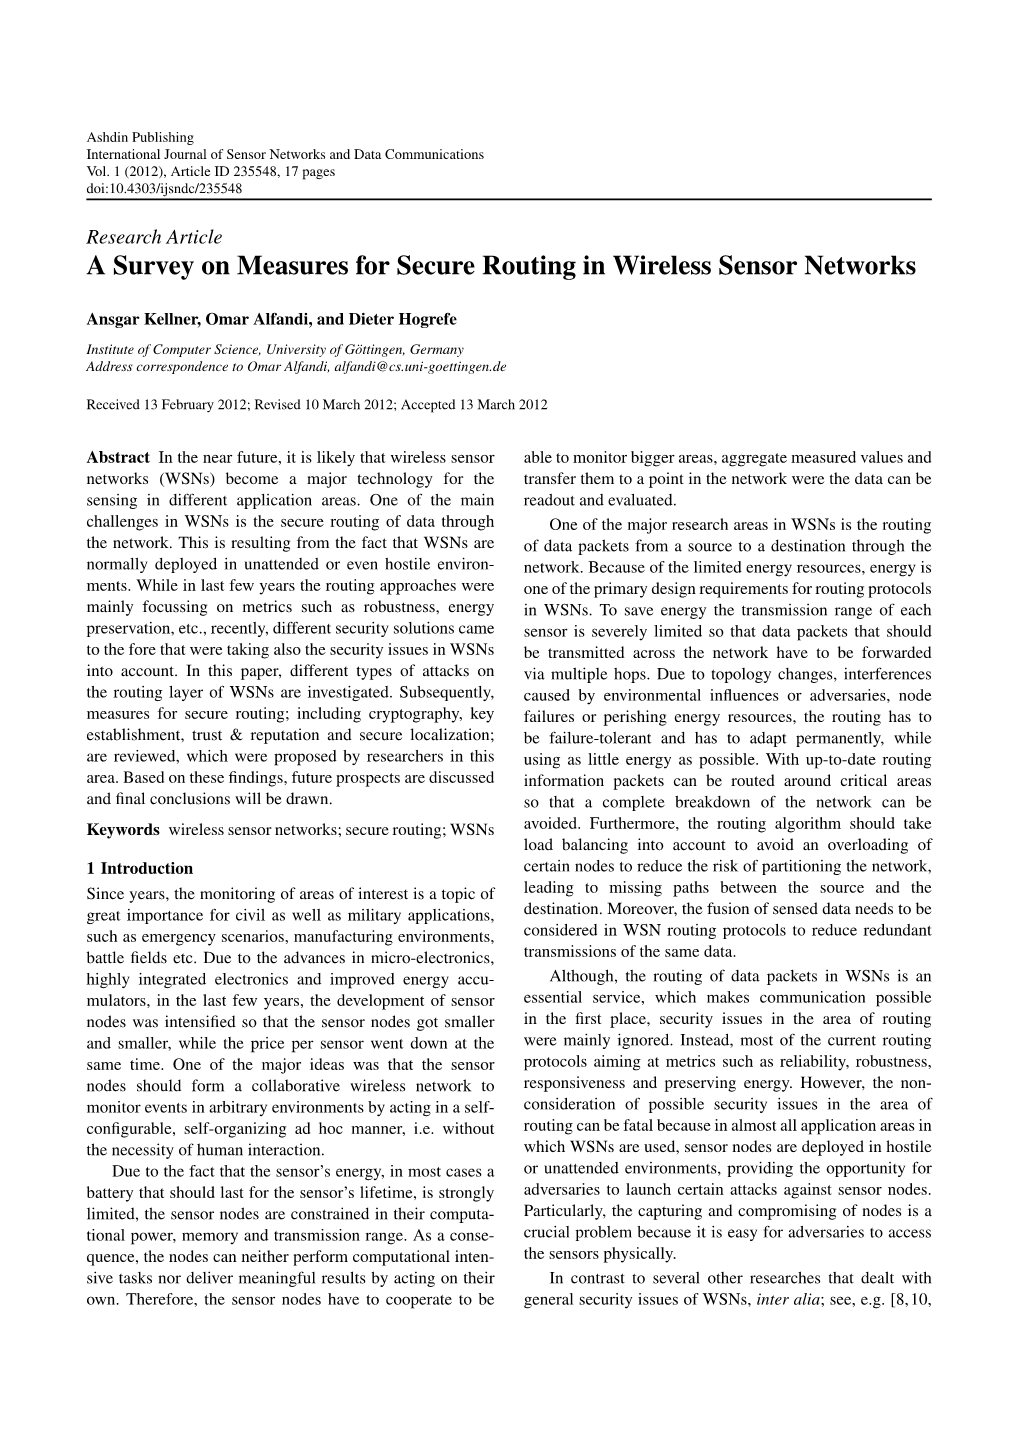 A Survey on Measures for Secure Routing in Wireless Sensor Networks